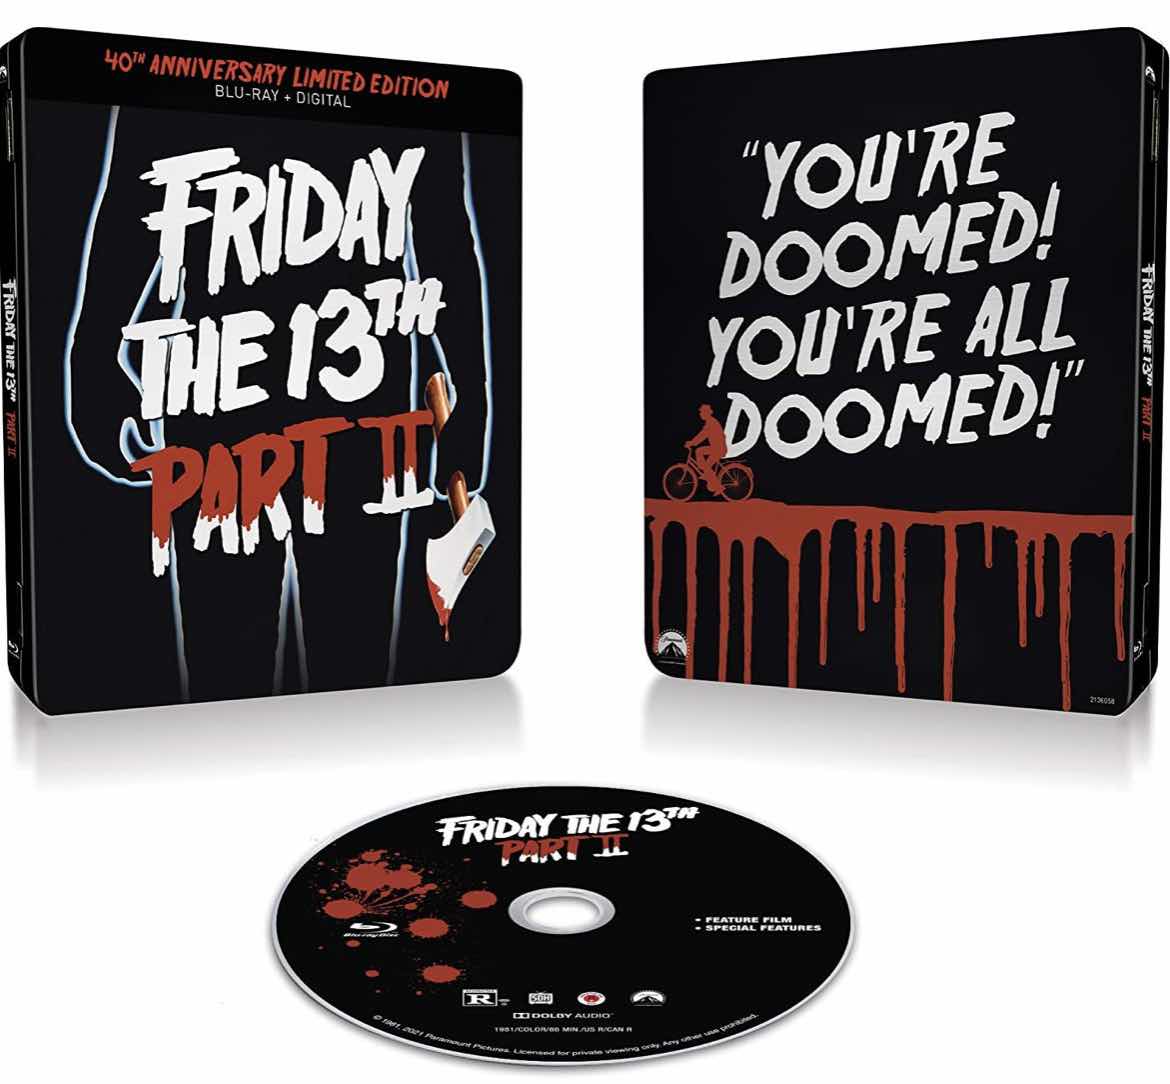 Friday The 13th Part 2 Steelbook Blu-Ray Coming This March